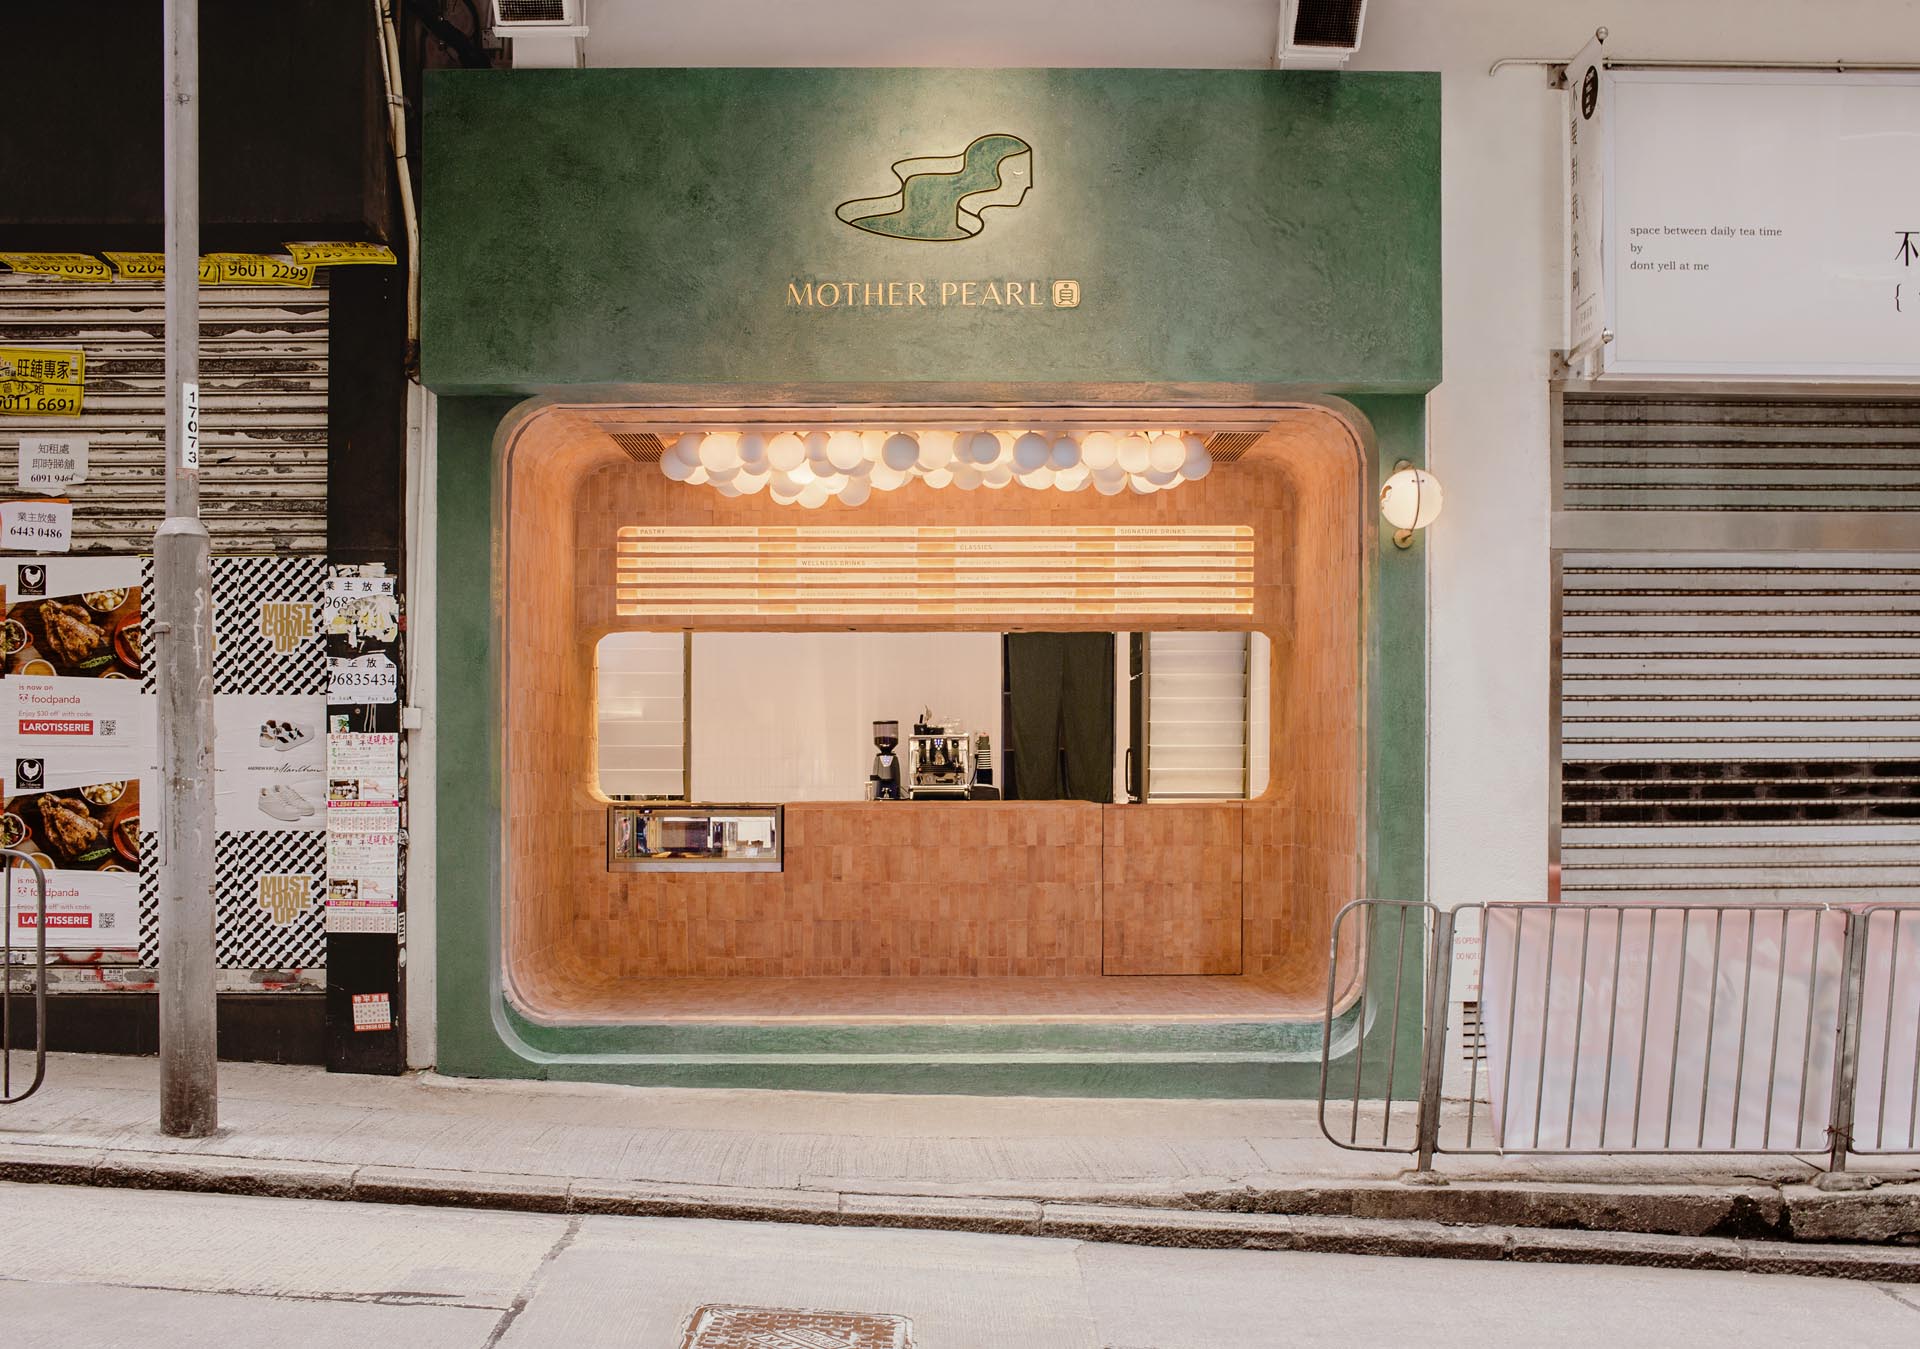 A modern bubble tea house with an olive green facade and a earth colored tiled interior.